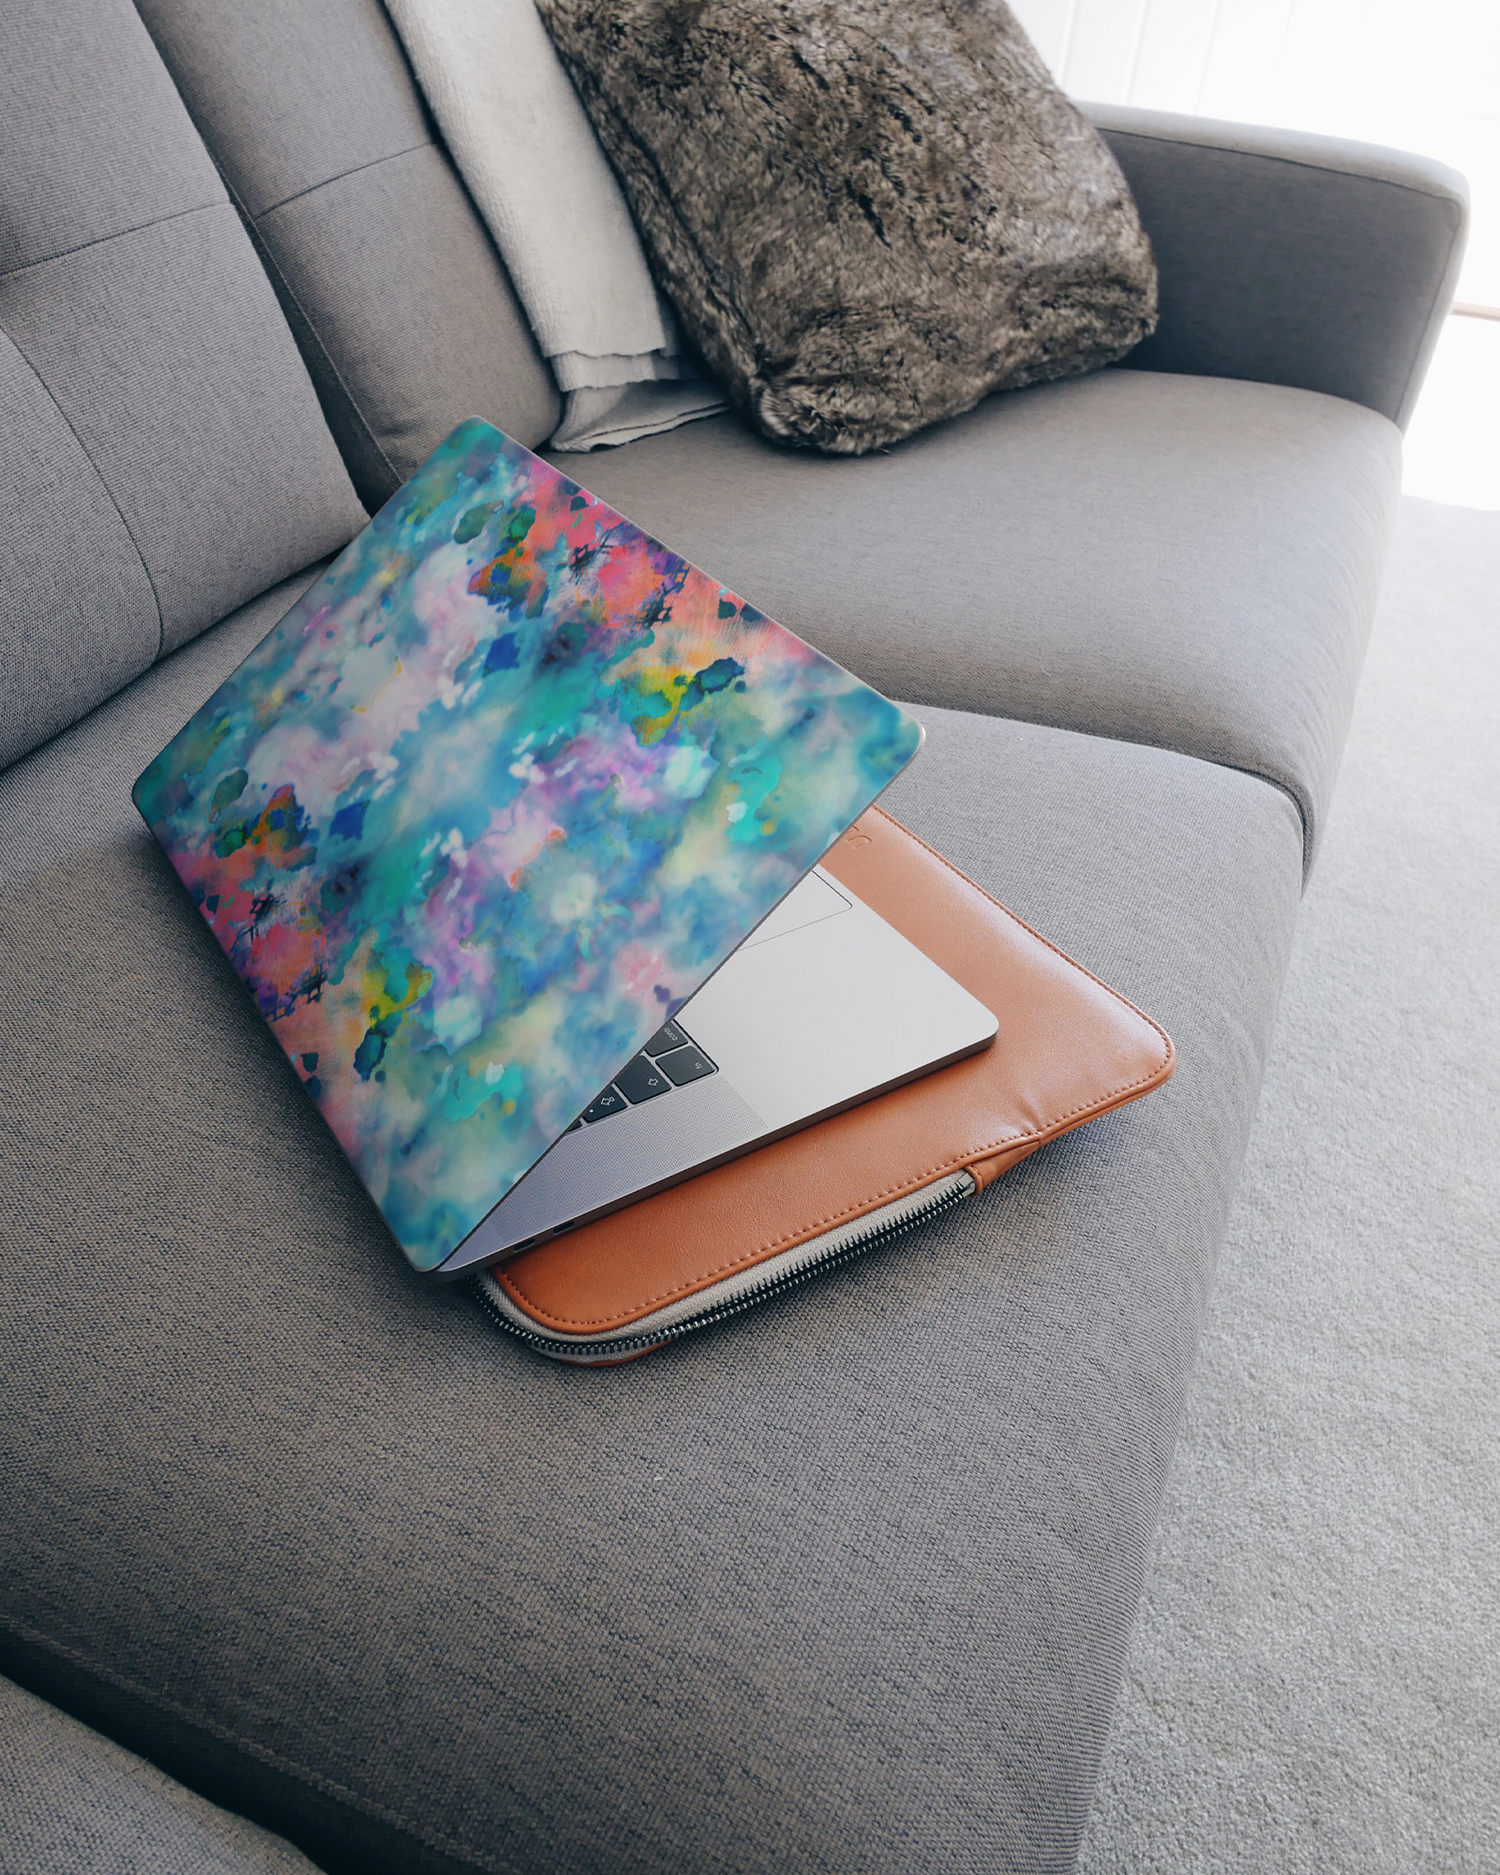 Paint Splatter Laptop Skin for 15 inch Apple MacBooks on a couch